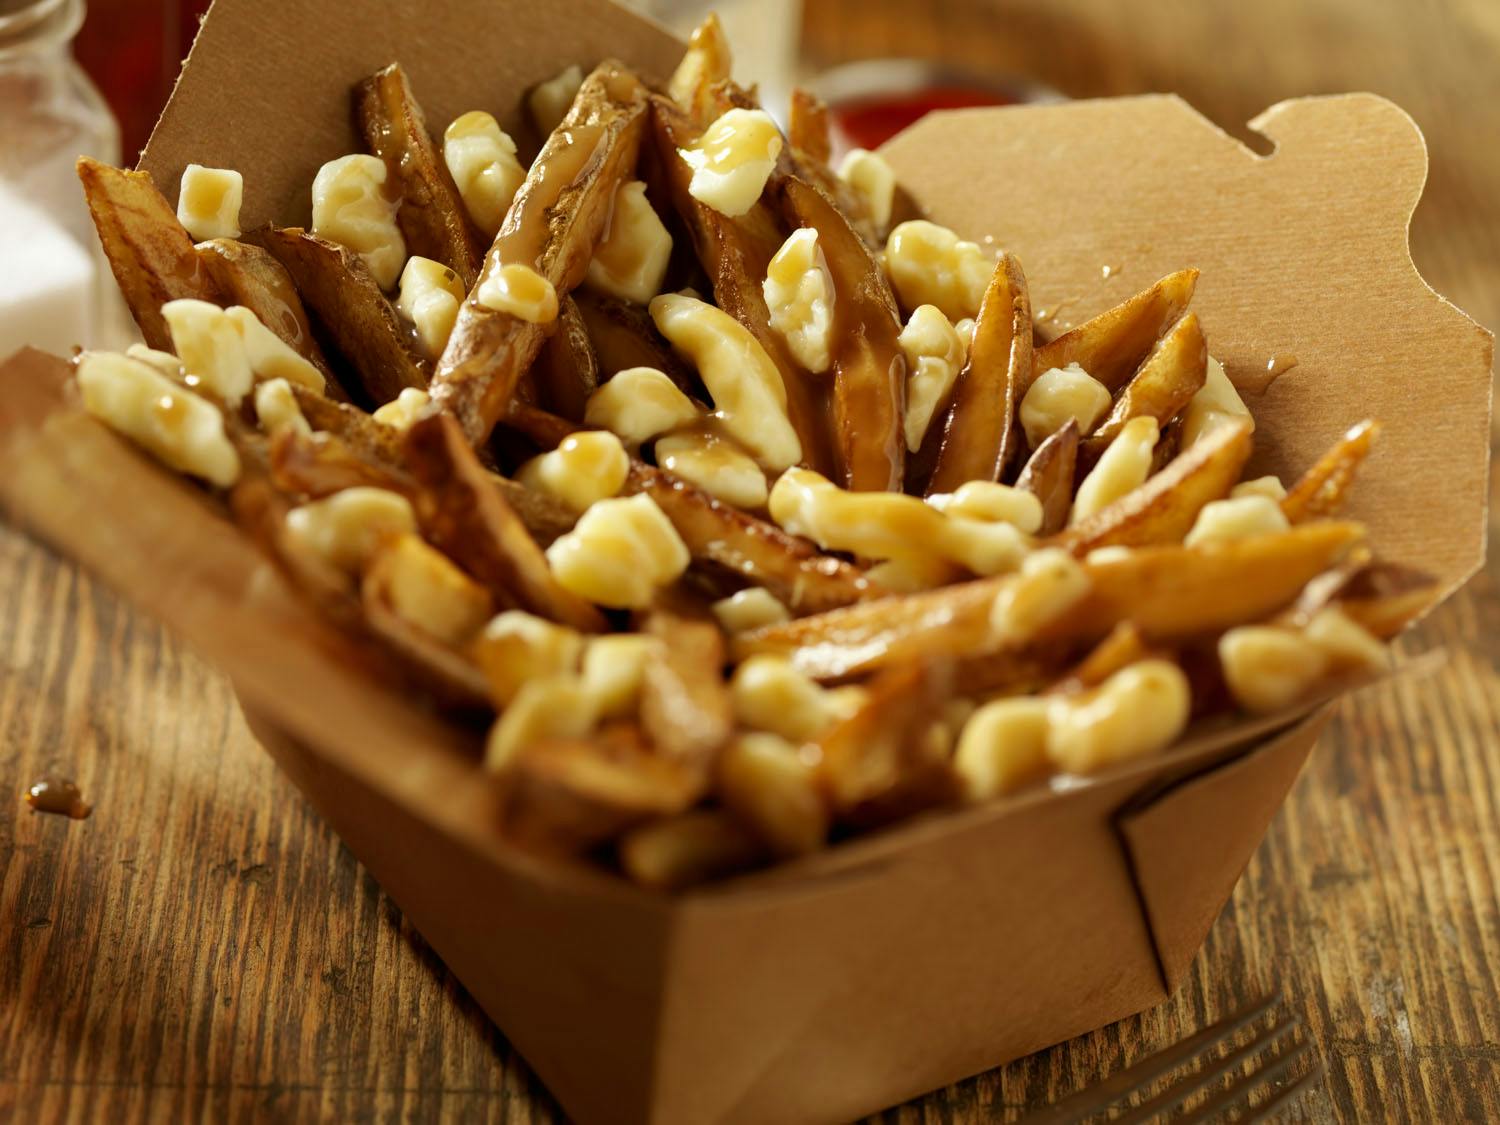 poutine - a classic french canadian dish